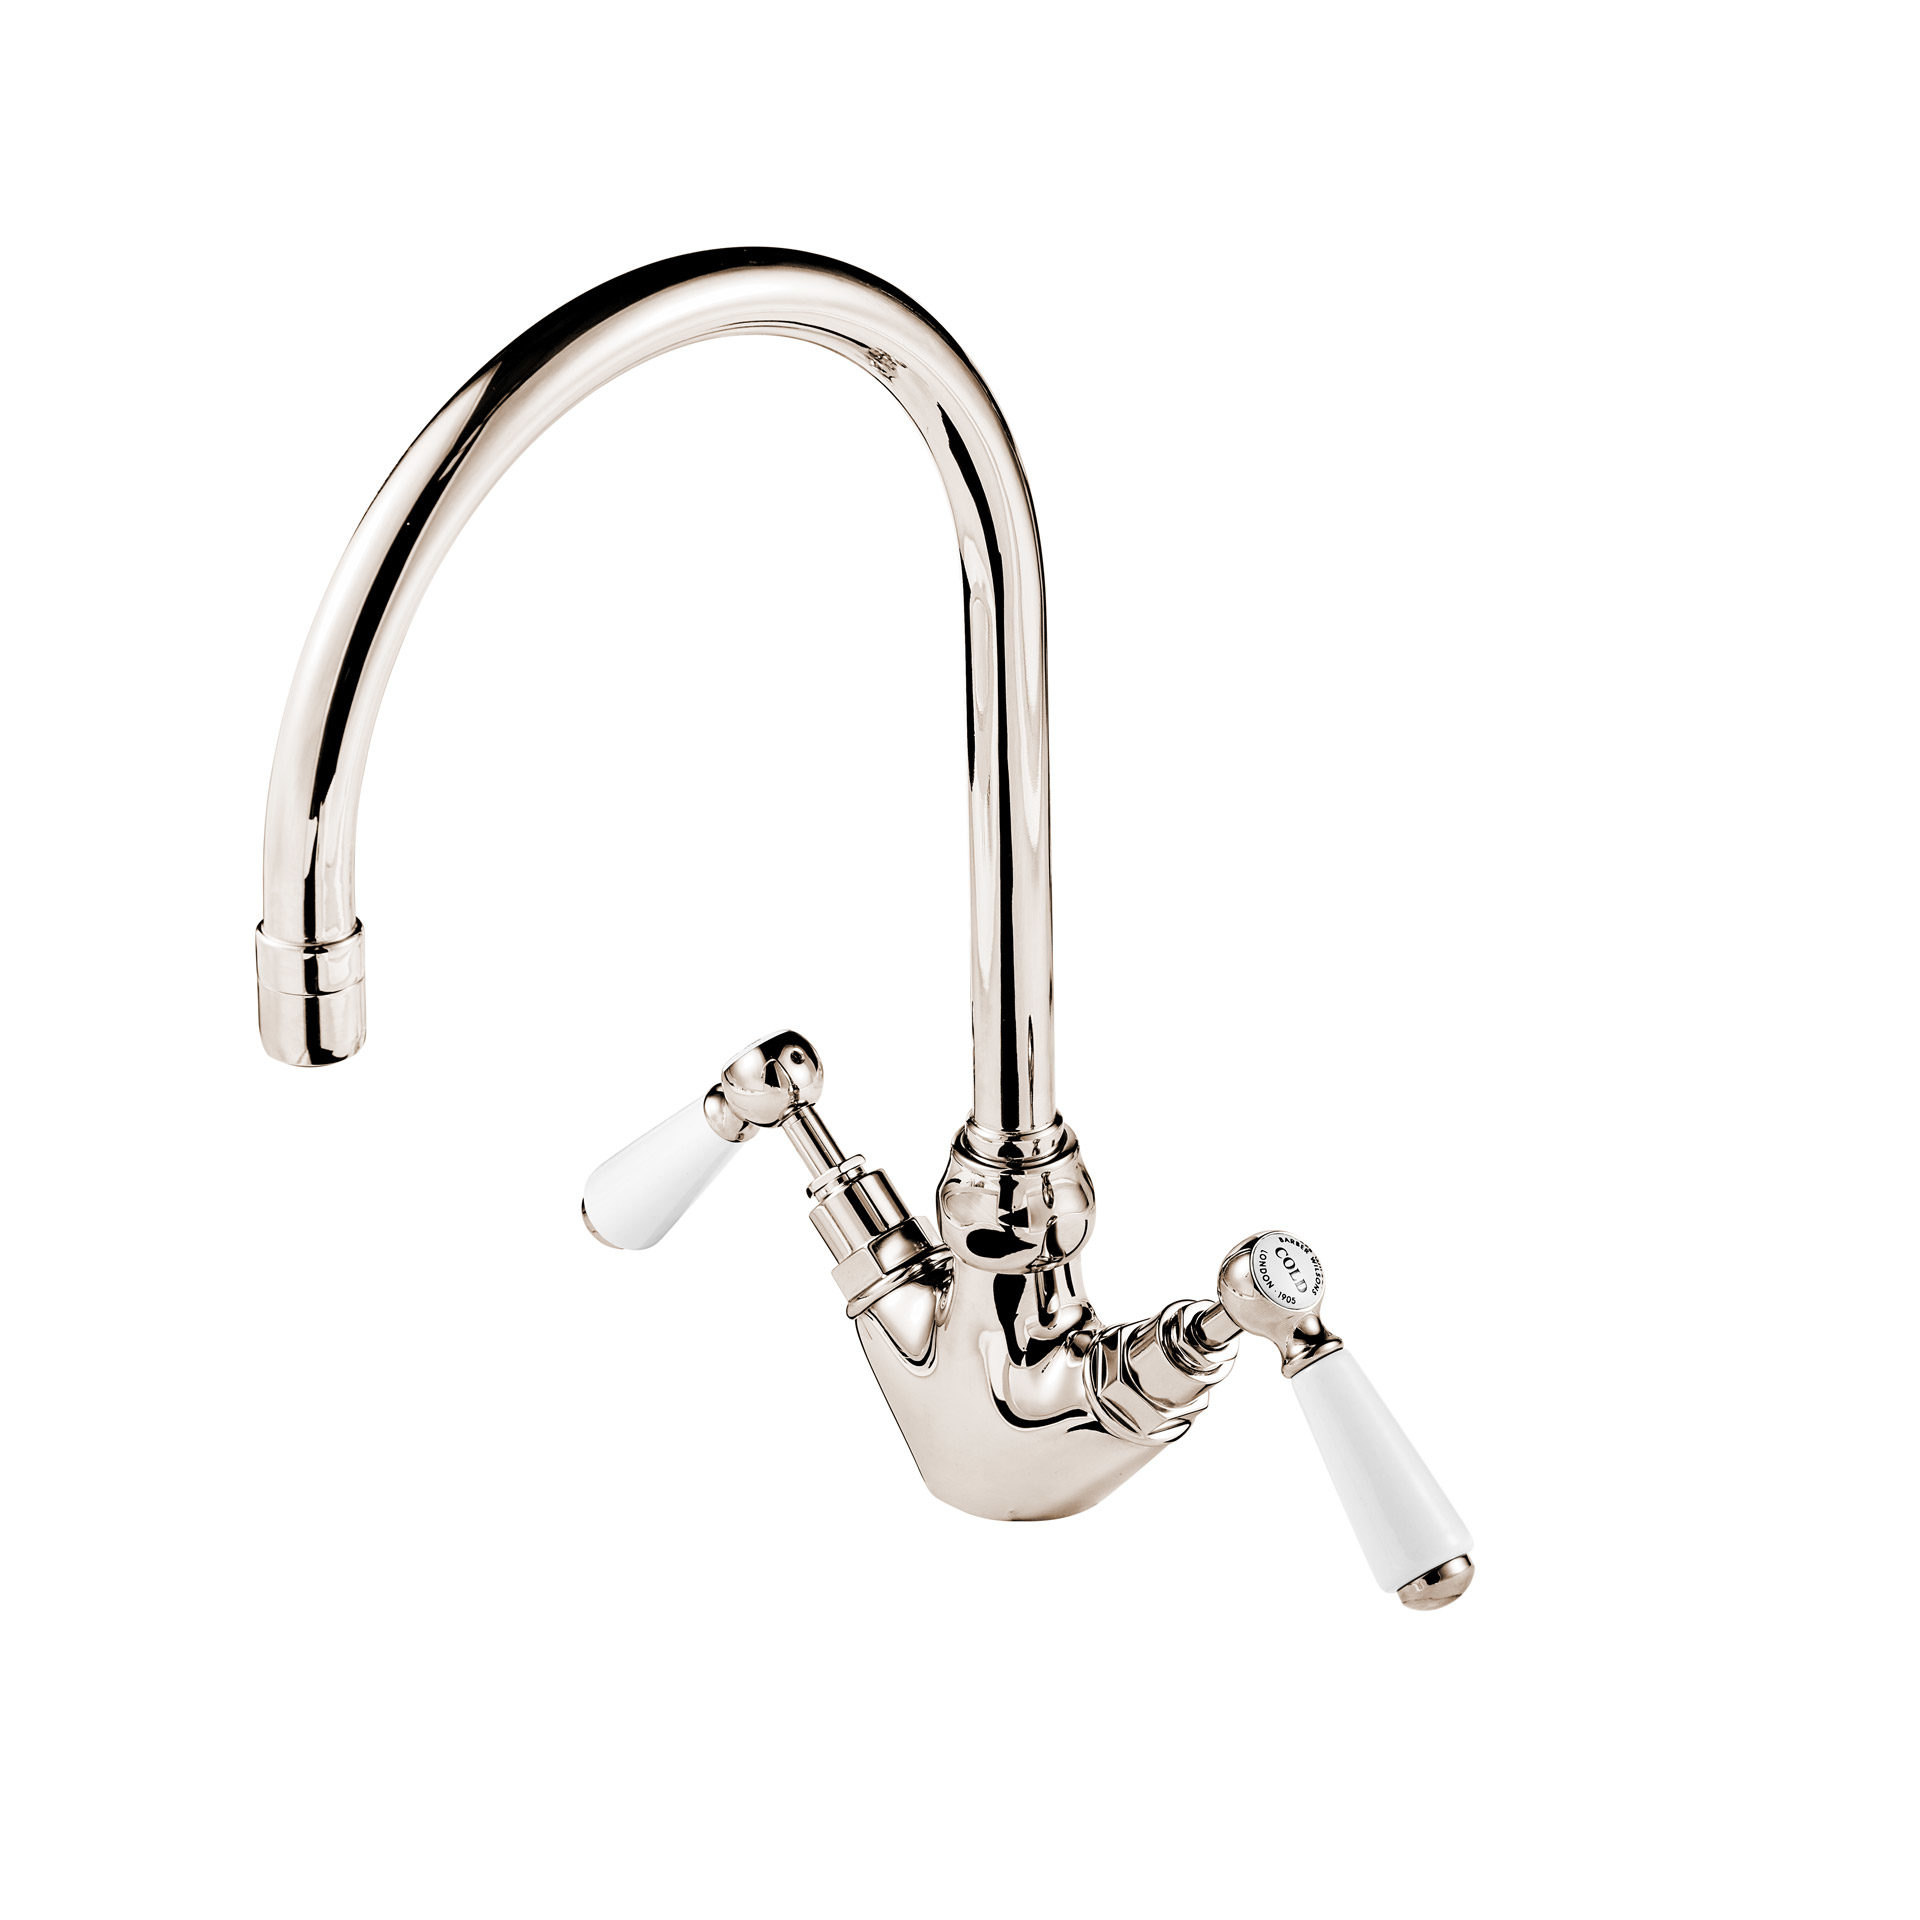 Deck mounted kitchen tap with single hole and china levers